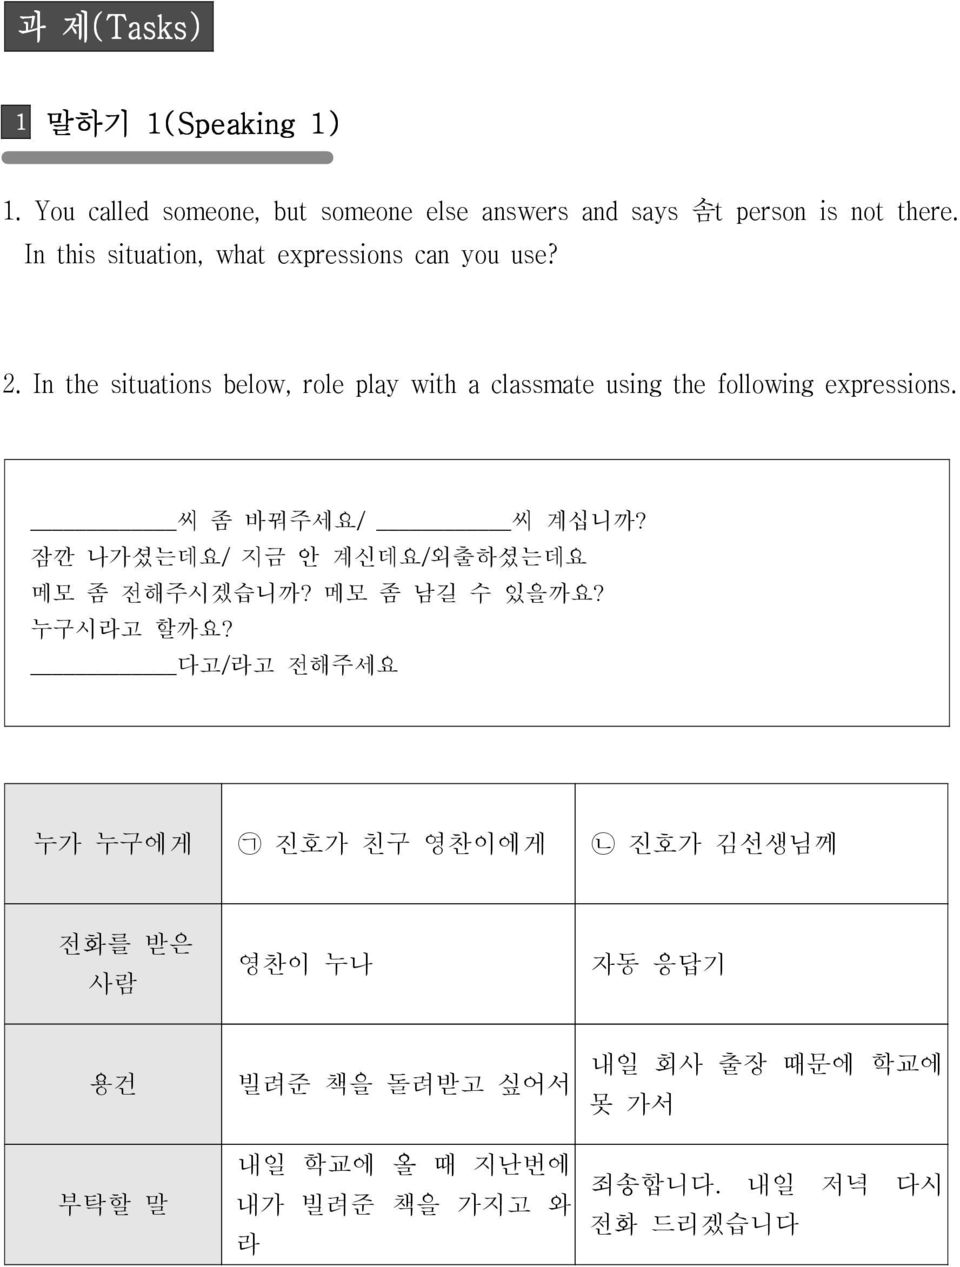 In the situations below, role play with a classmate using the following expressions. 씨 좀 바꿔주세요/ 씨 계십니까?